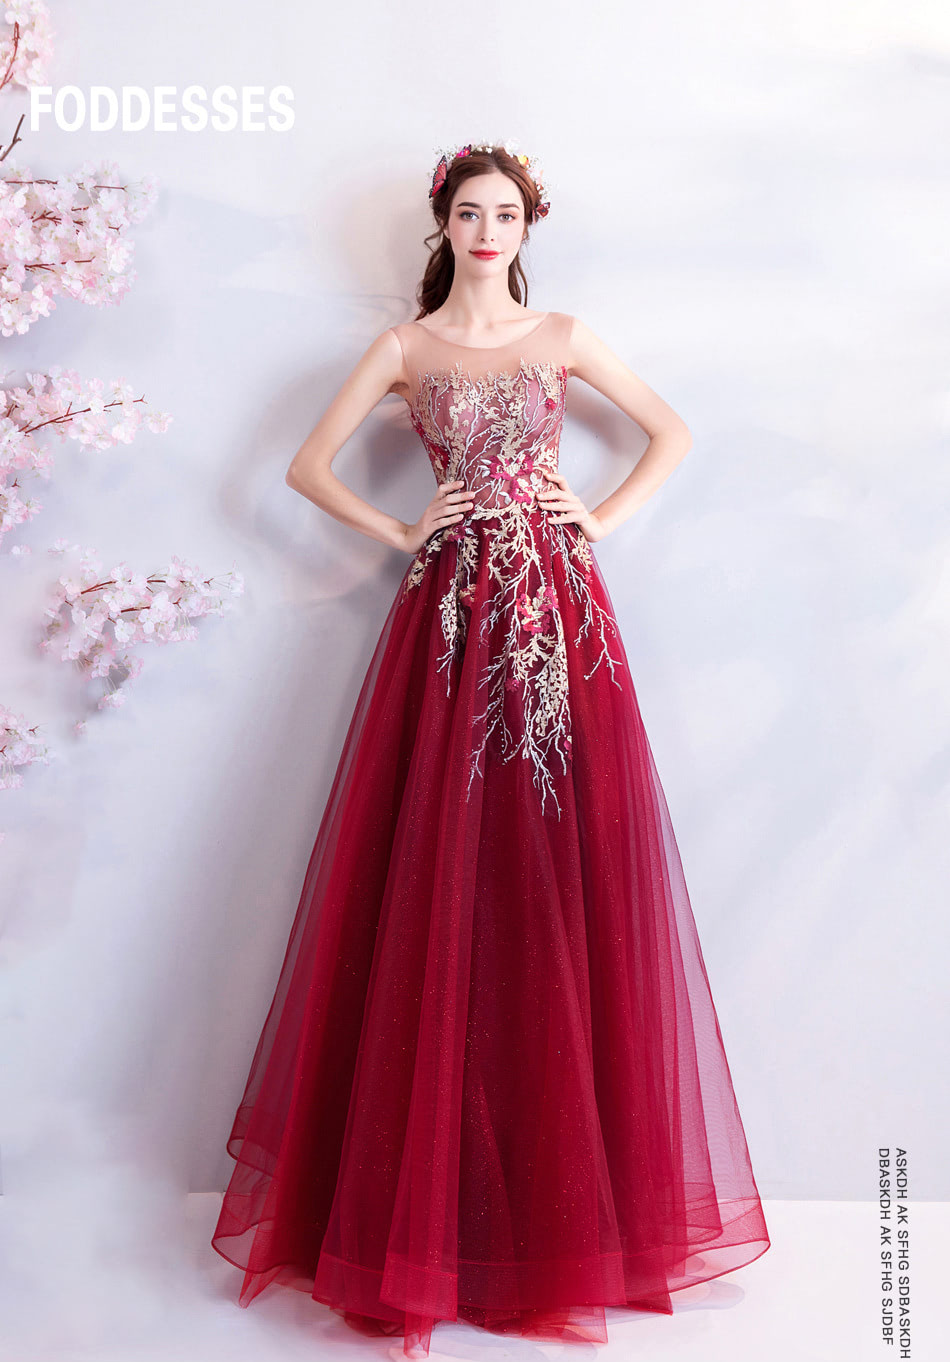 Gorgeous-Red-Couture-Dress-for-Wedding-Party-Prom-All-Occasions07.jpg